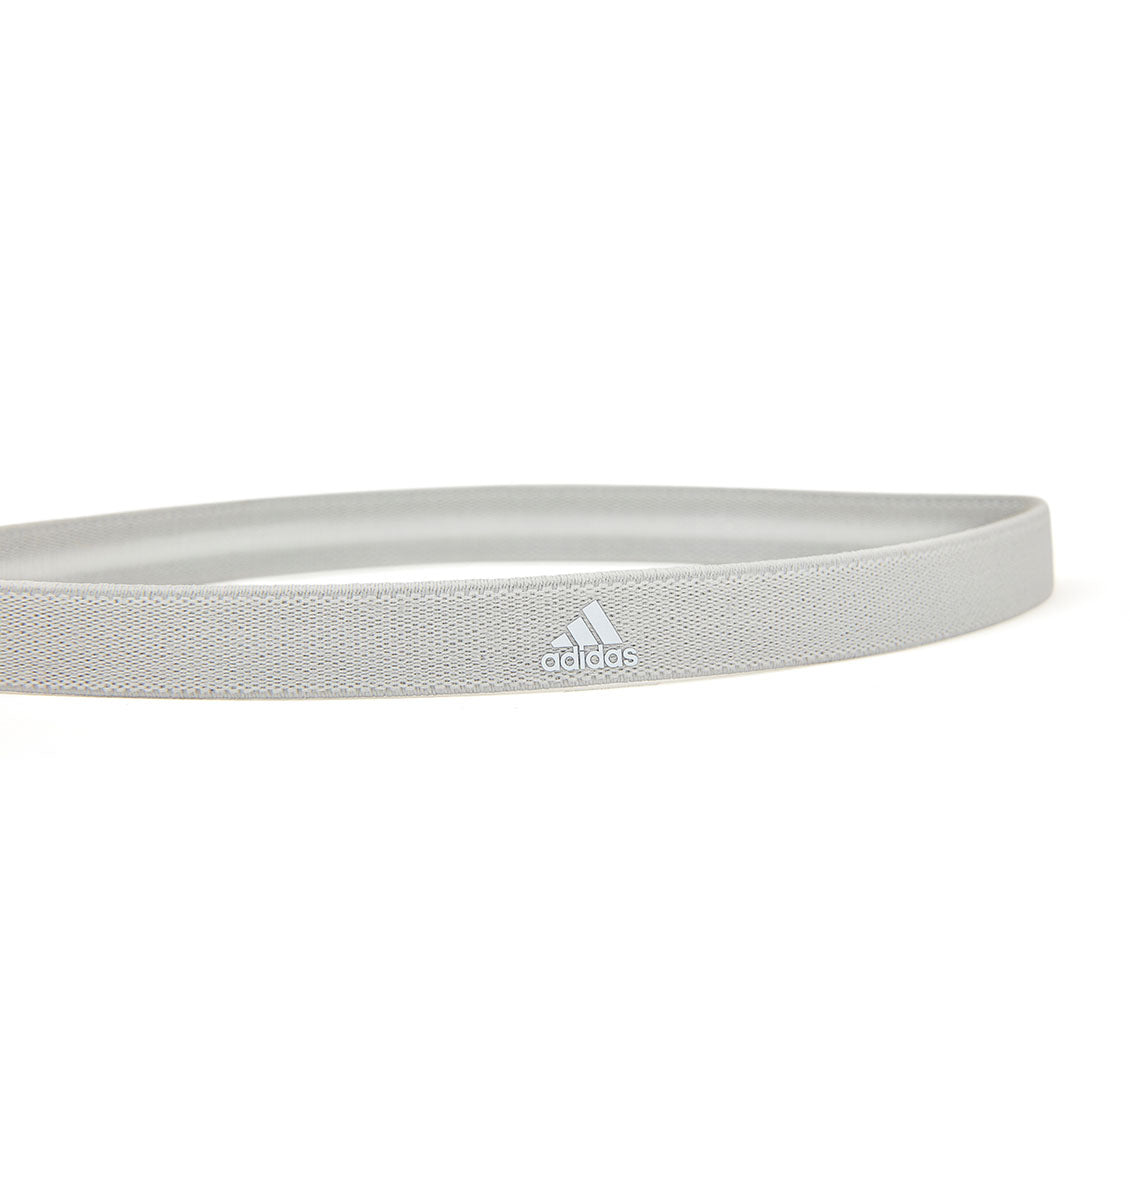 adidas Sports Hair Bands - Black/Grey/Powerberry (3 Pack) - 7